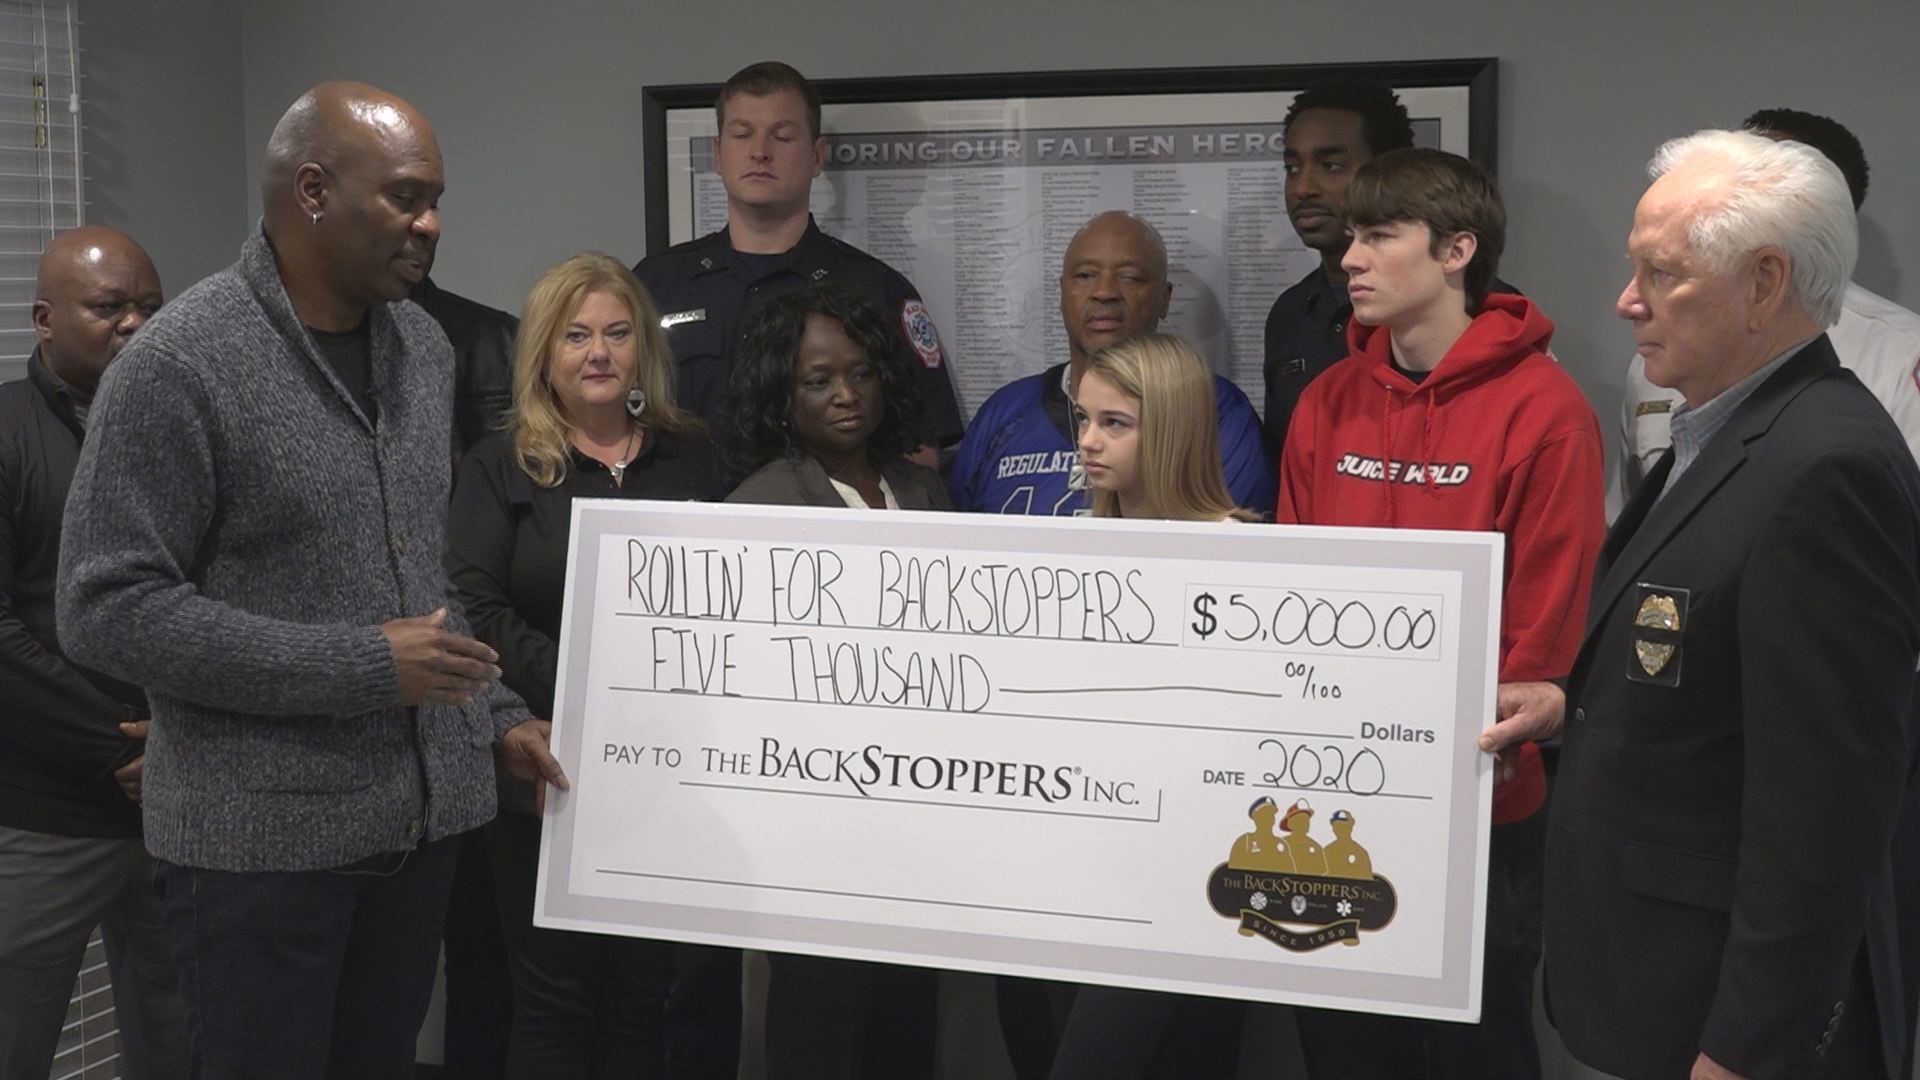 The sub-organization has raised more than 65,000 for Backstoppers in the last 10 years.